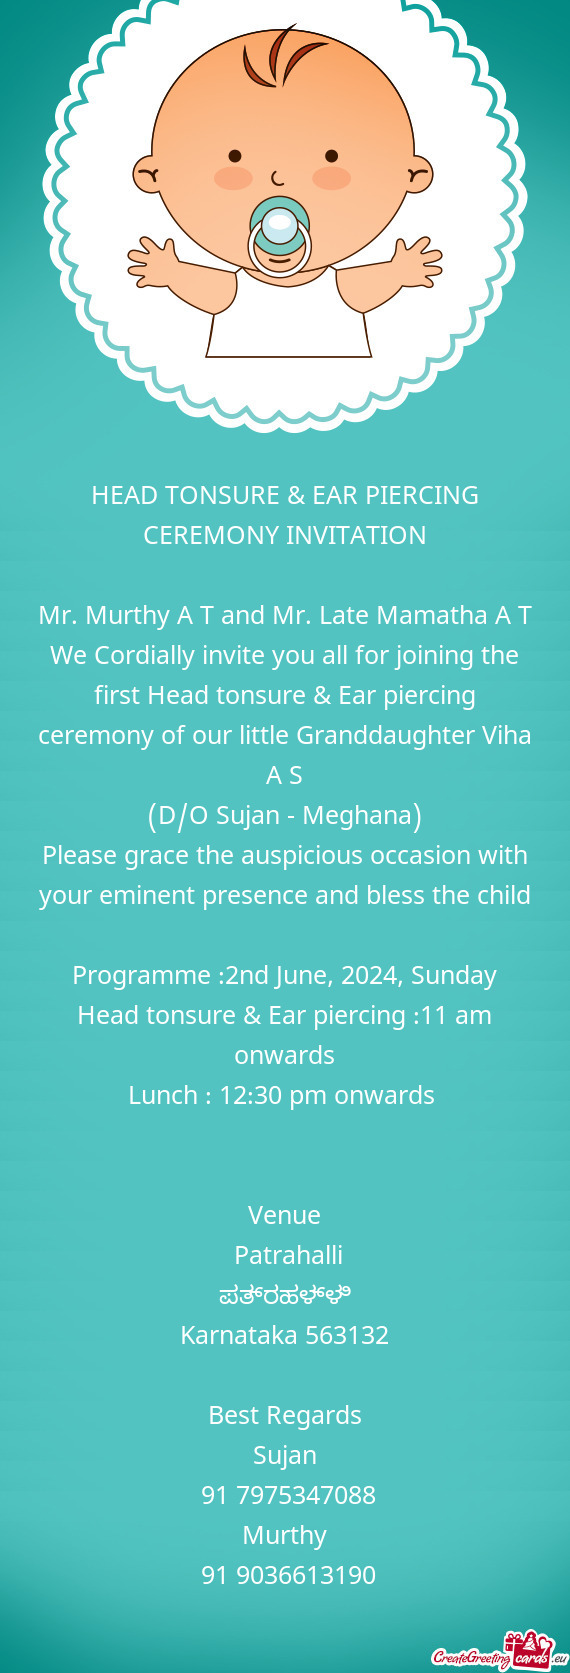 Re & Ear piercing ceremony of our little Granddaughter Viha A S